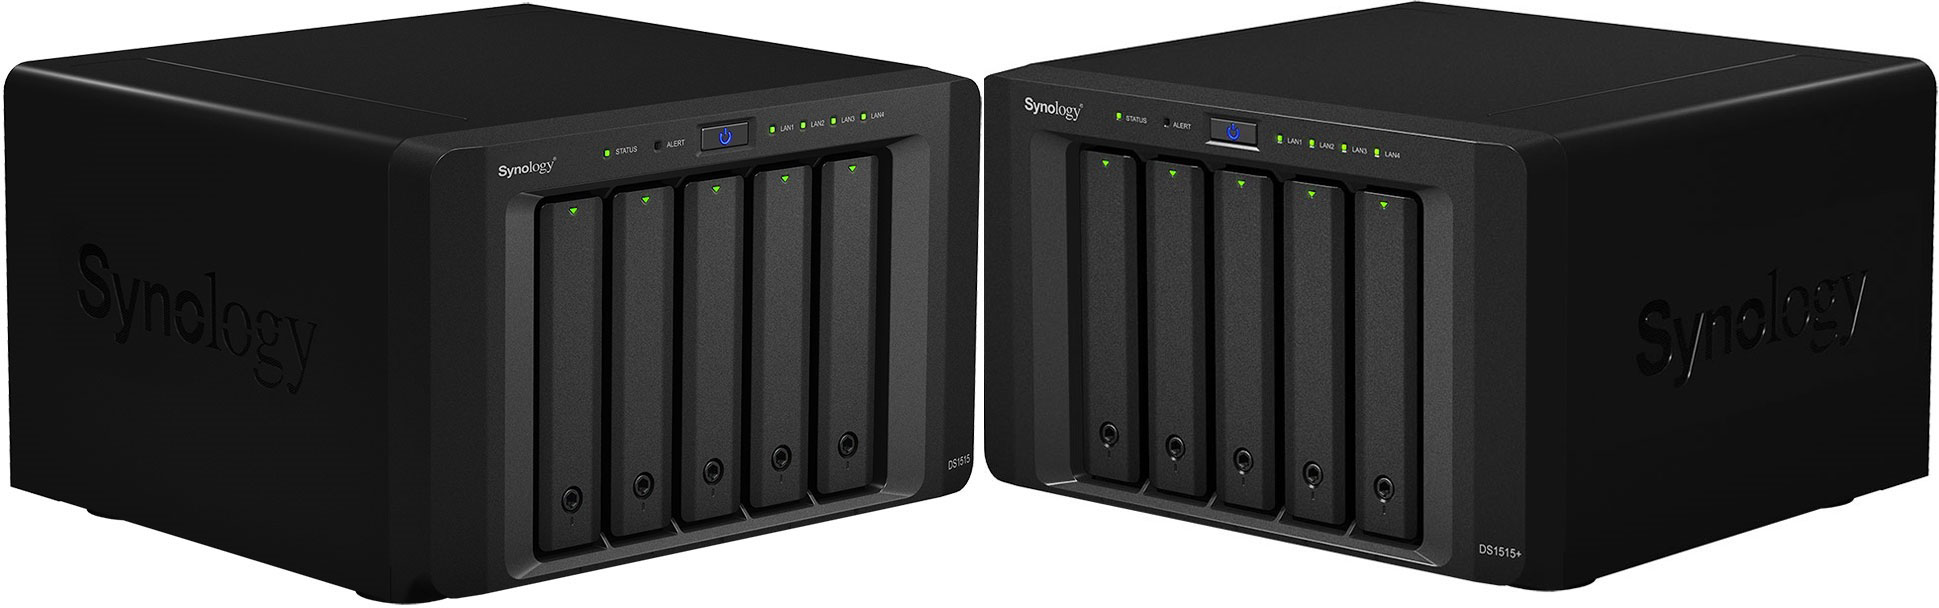 Synology DS1515 et 1515+